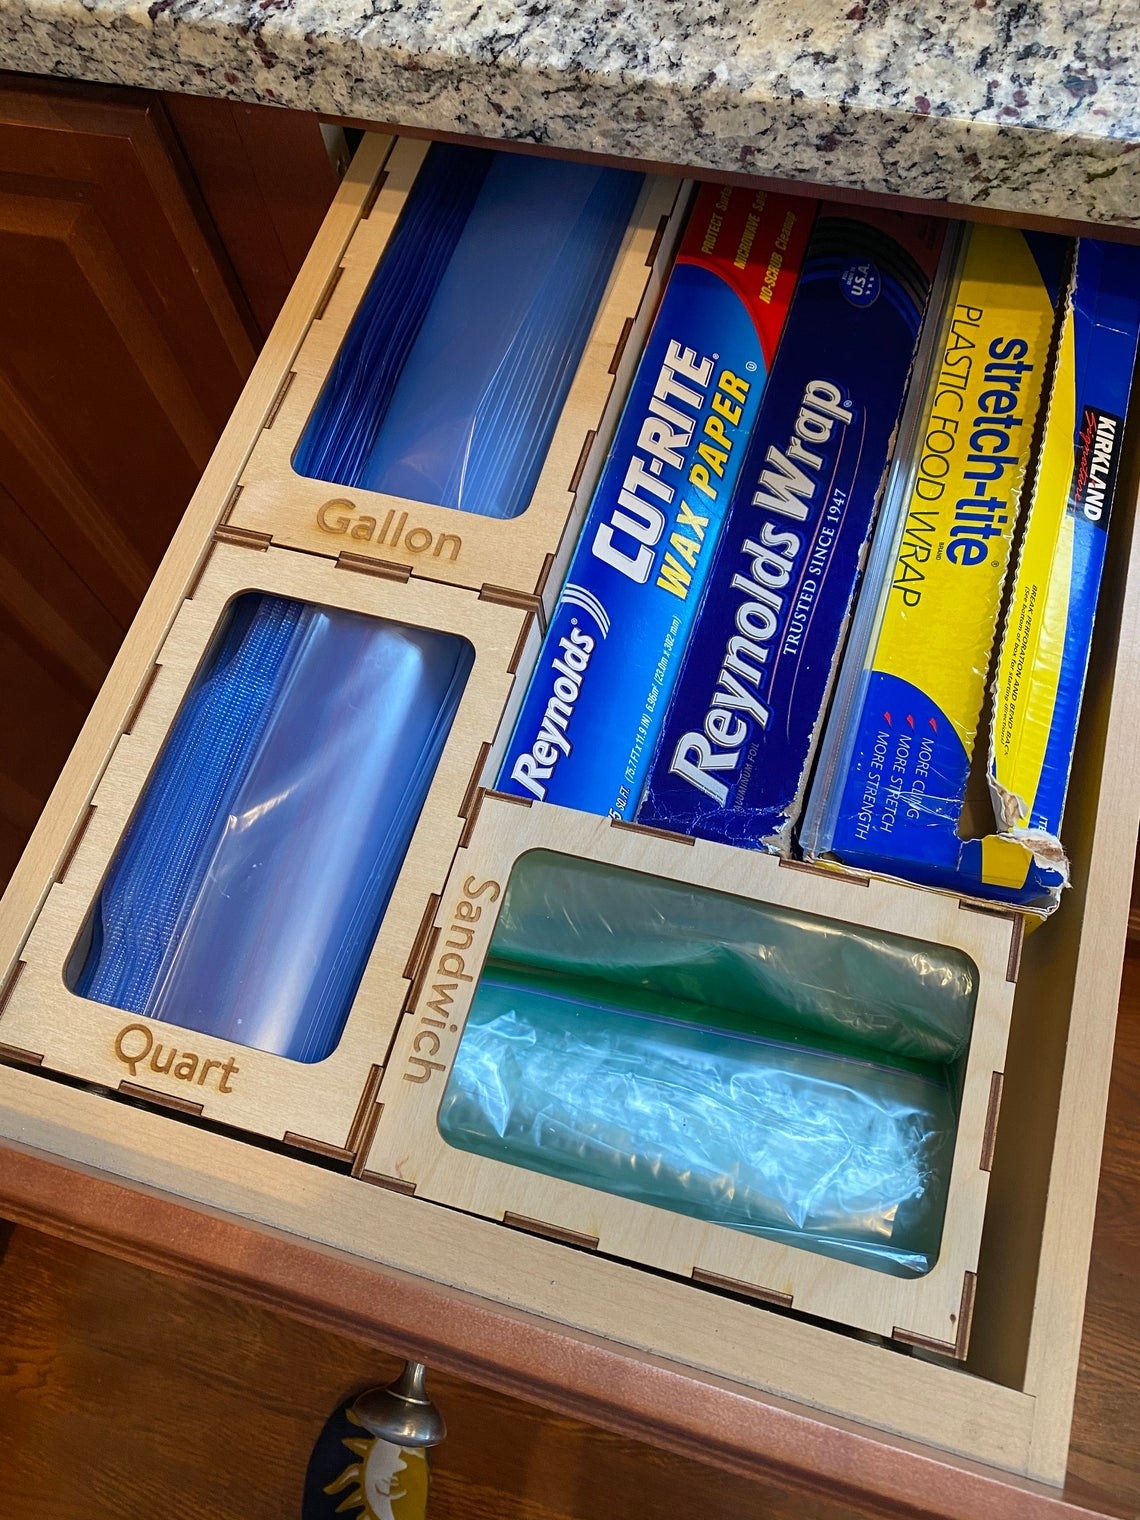 The organizers in a drawer